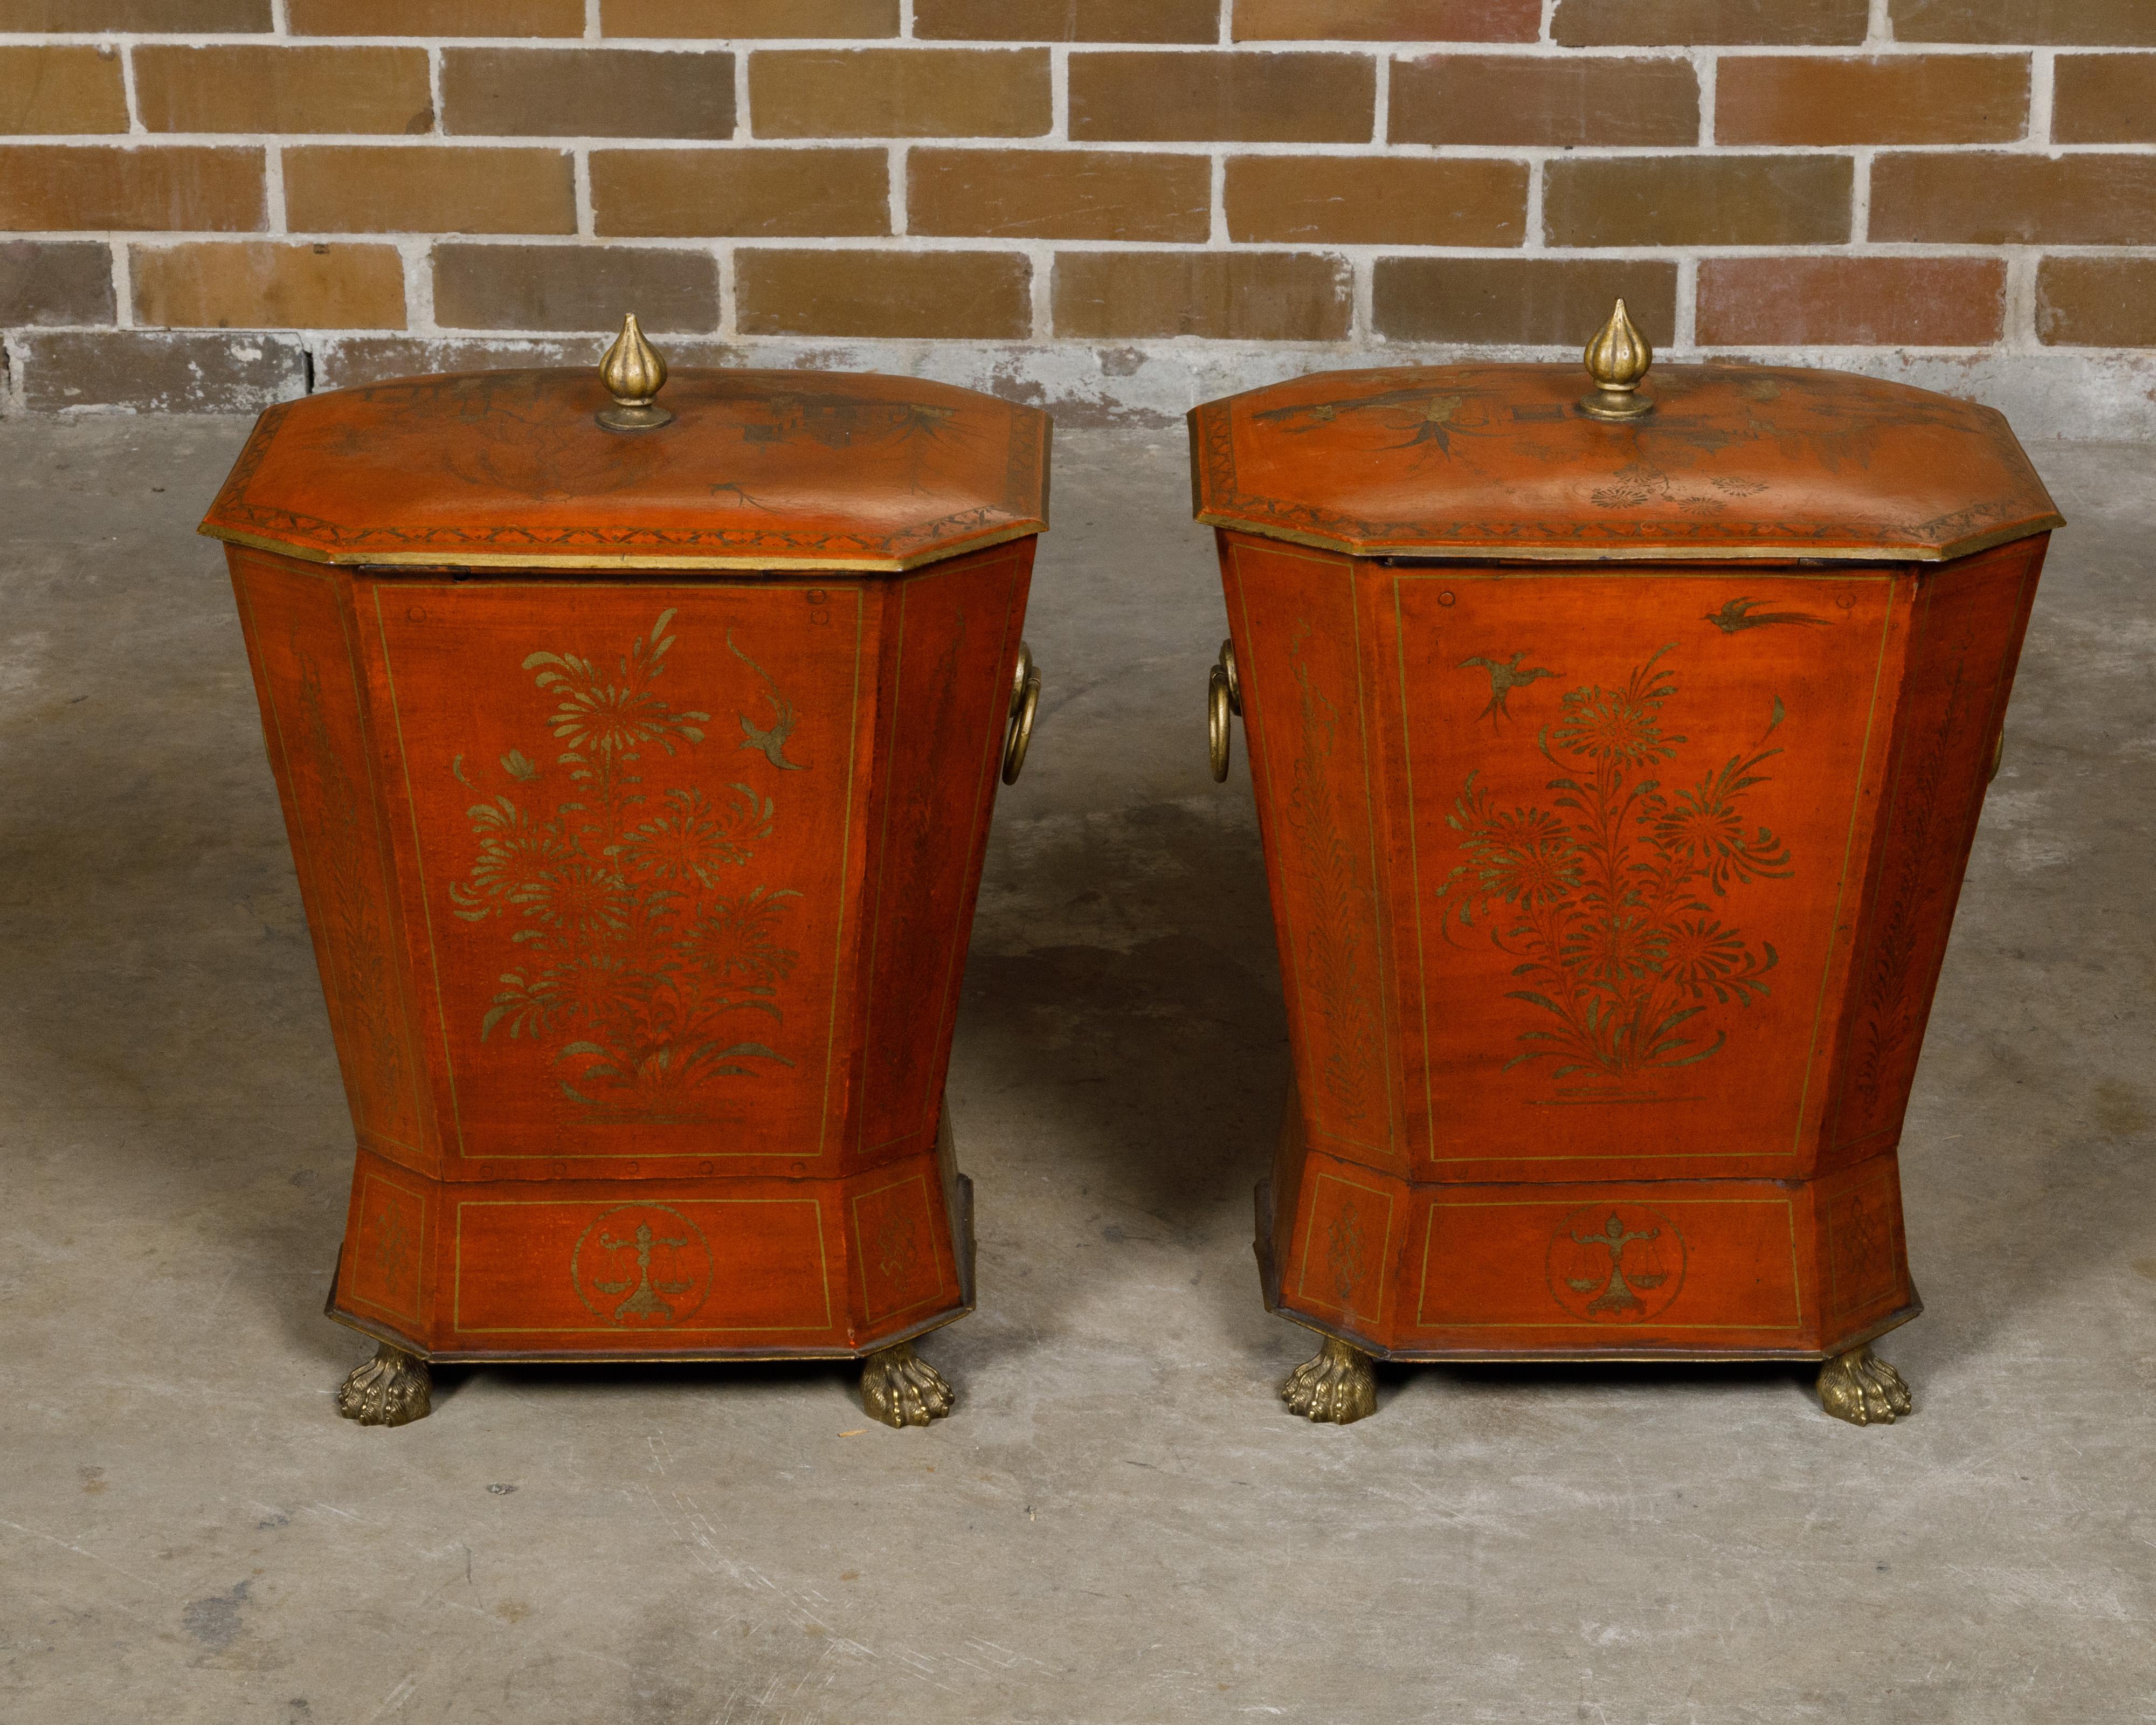 Pair of English Victorian 19th Century Red Lacquer Cellarettes with Chinoiseries For Sale 7